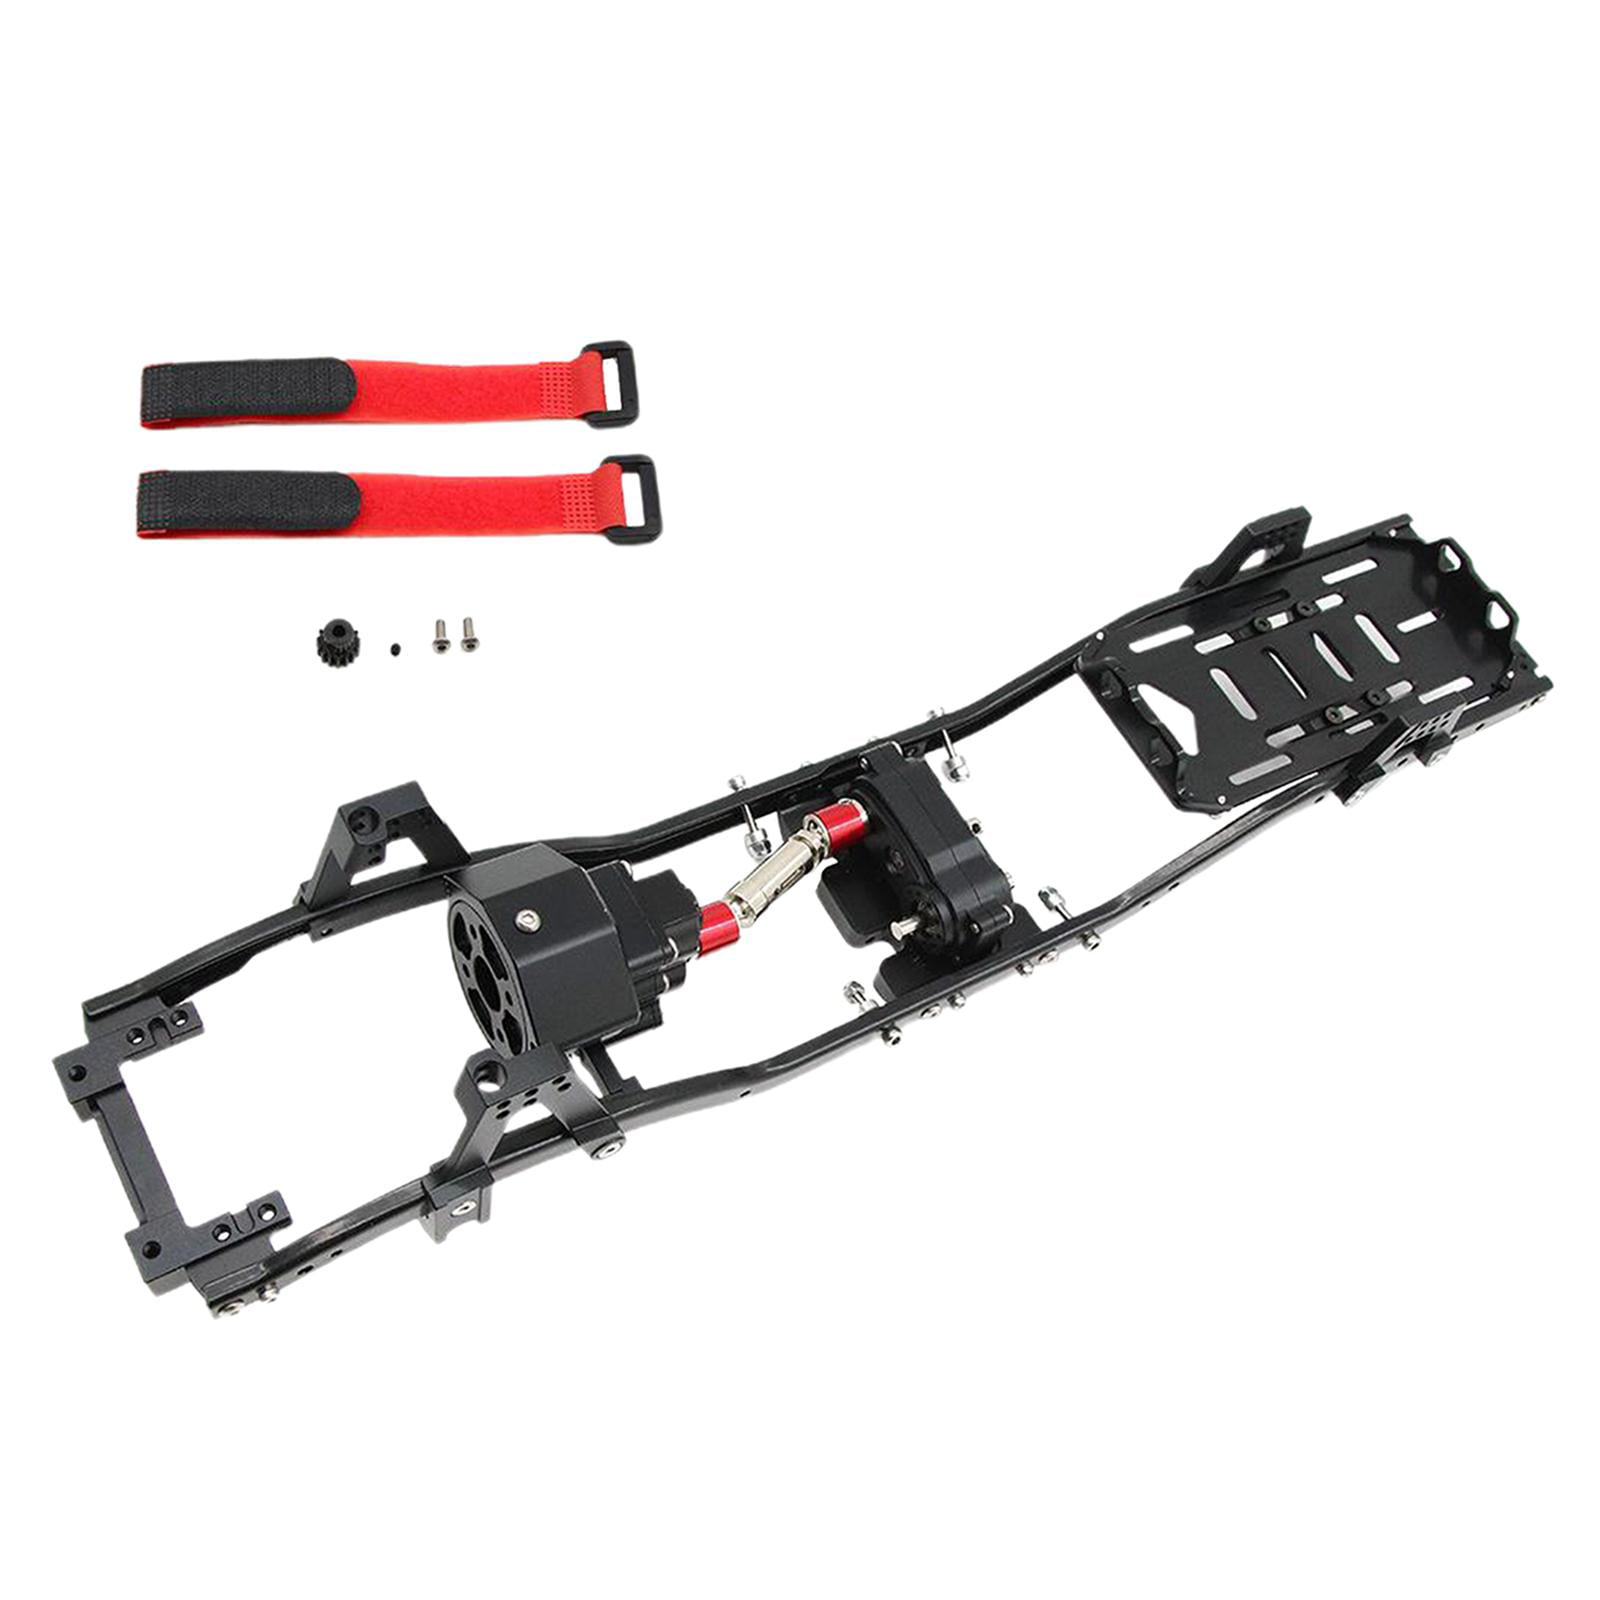 Details about   For 1/10 RC Climbing 313mm Wheelbase Metal Chassis Frame Prefixal Gearbox Set 